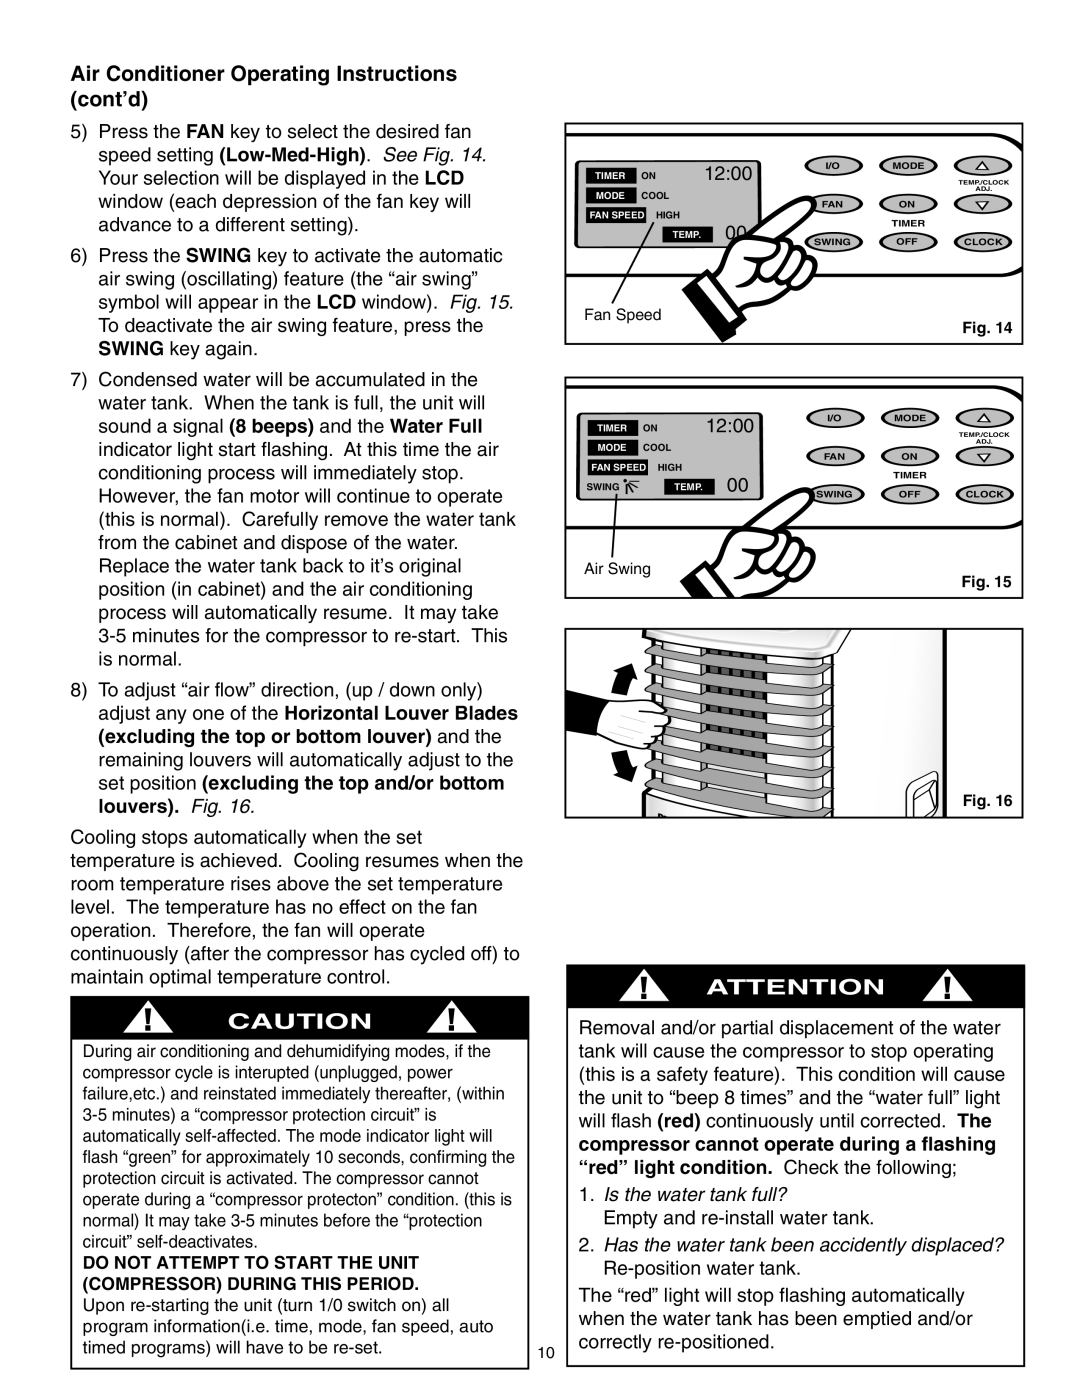 Danby SPAC8499 manual Air Conditioner Operating Instructions cont’d, 12:00, excluding the top or bottom louver and the 